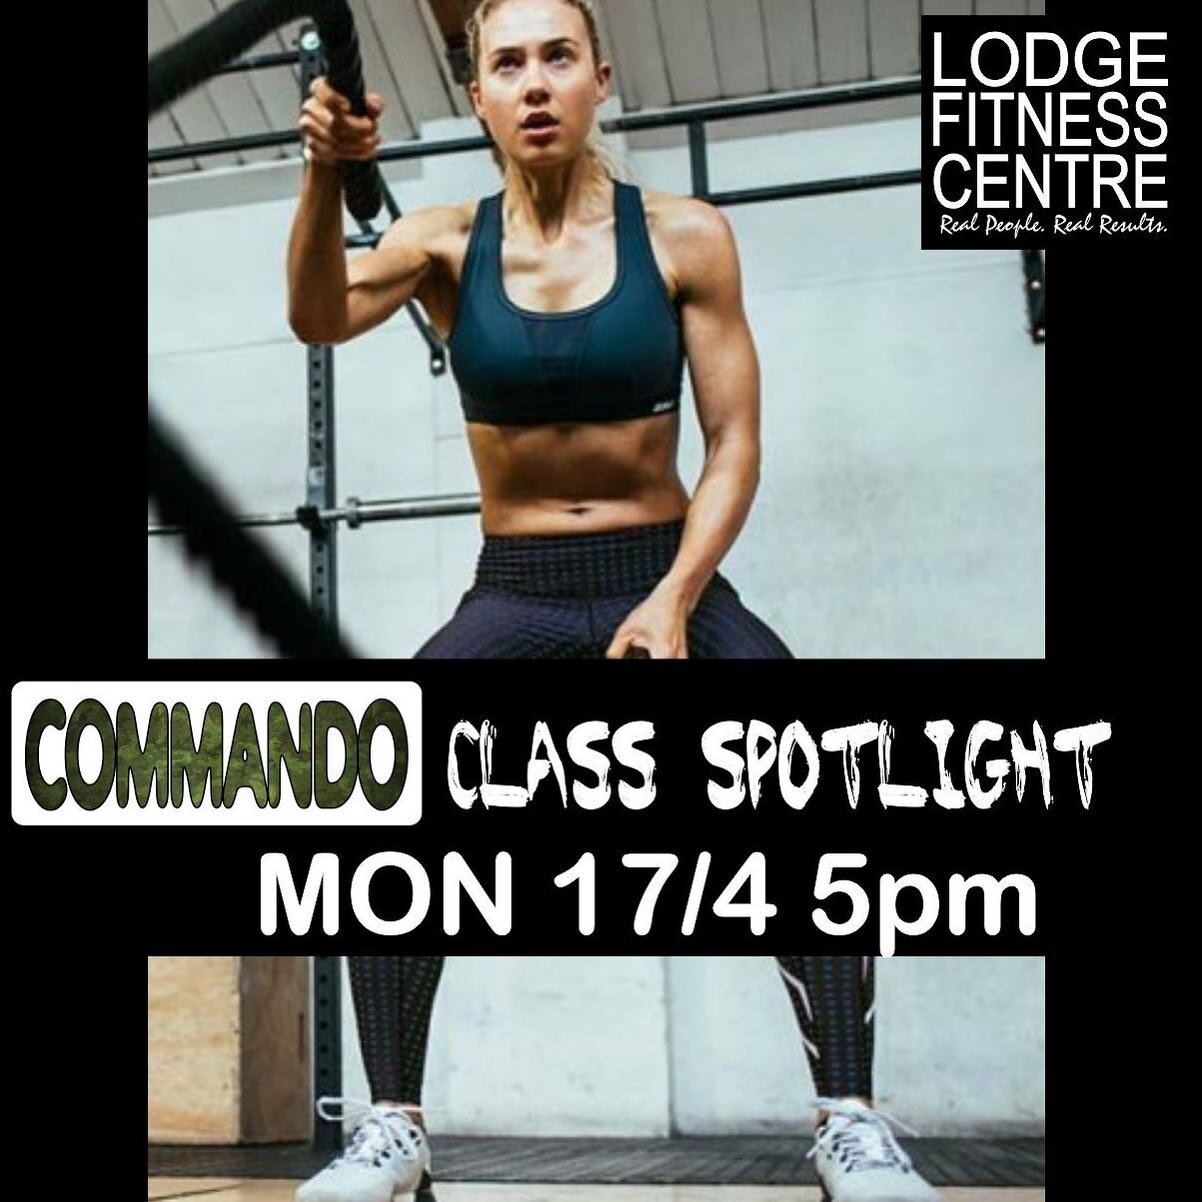 Have you tried our Commando Bootcamp? Our class spotlight is your chance! Bookings open now on the app! #livelodgefit